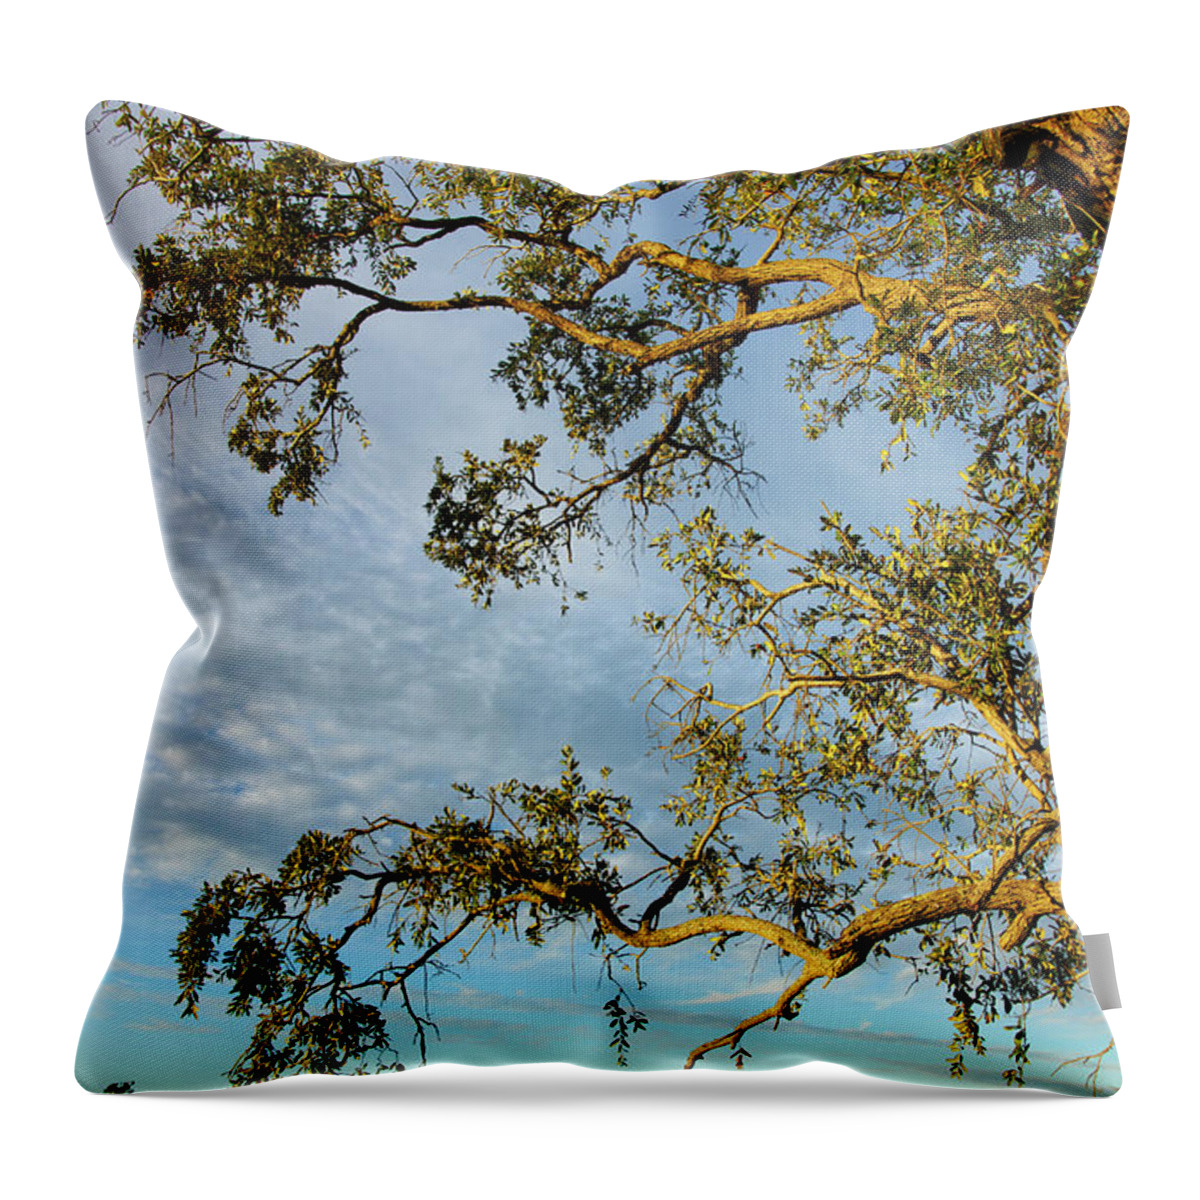 Scenics Throw Pillow featuring the photograph Branches Of Live Oak Tree Frame A Marsh by Joseph Shields